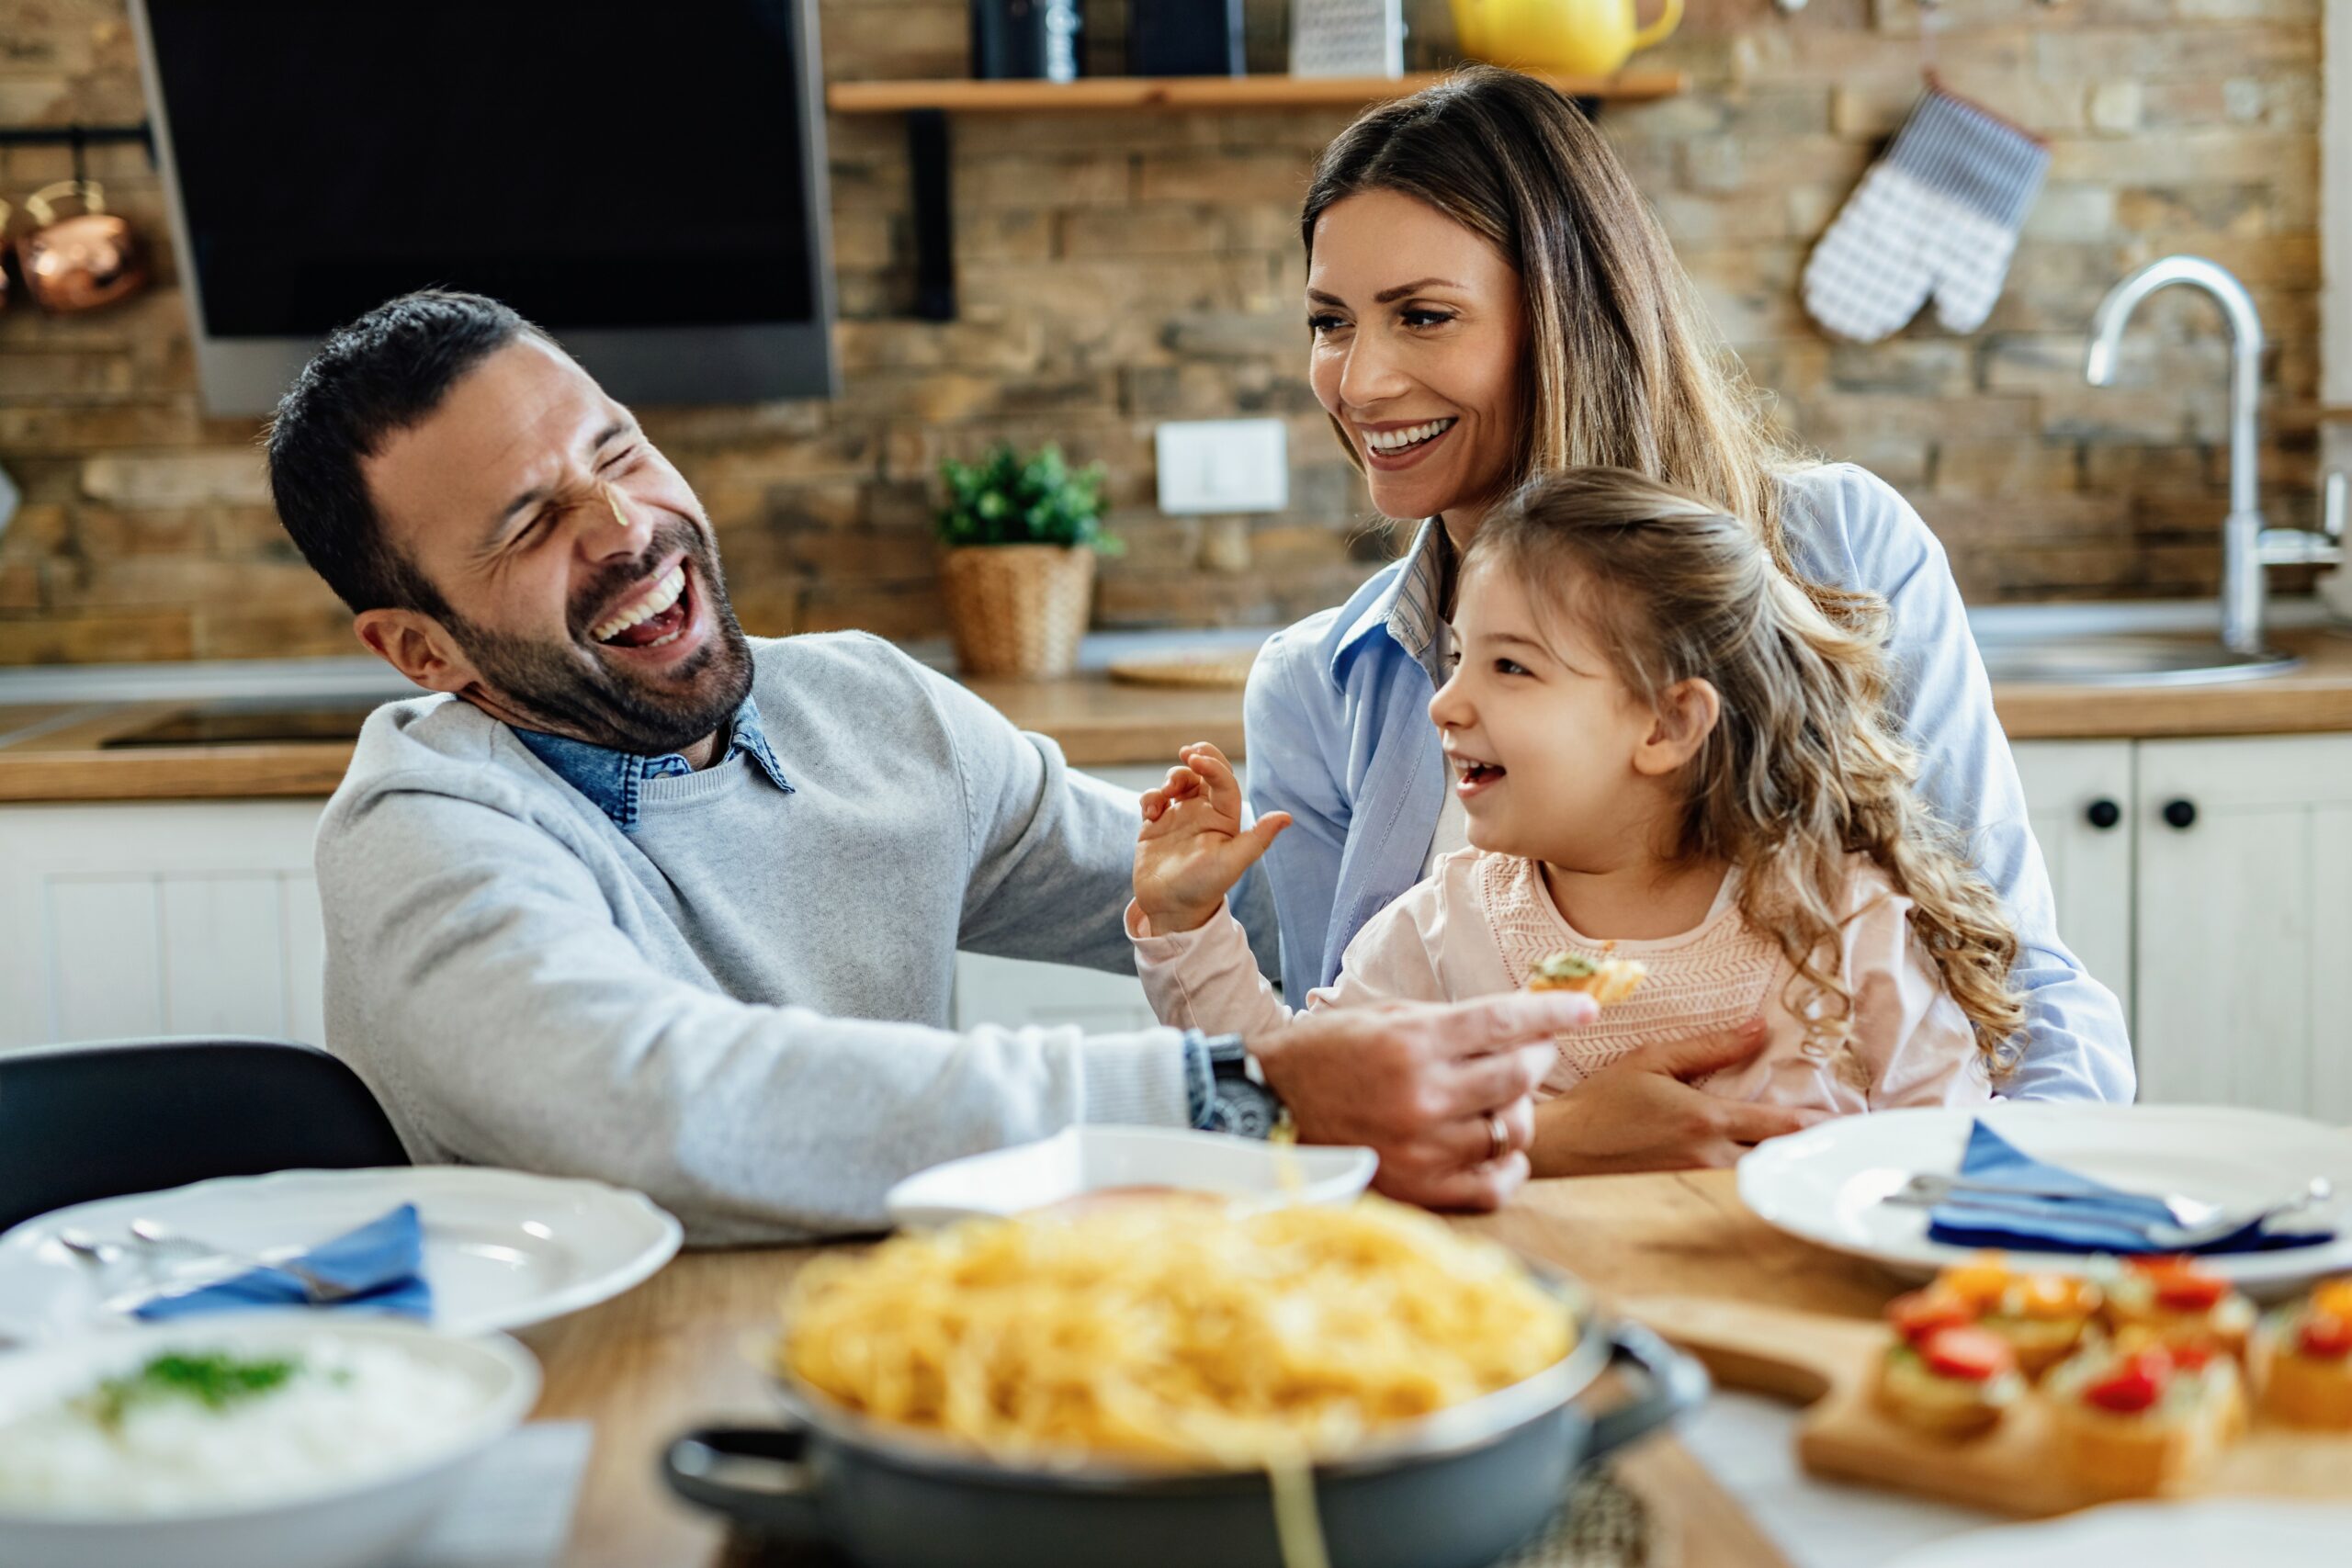 Families who eat together are less stressed